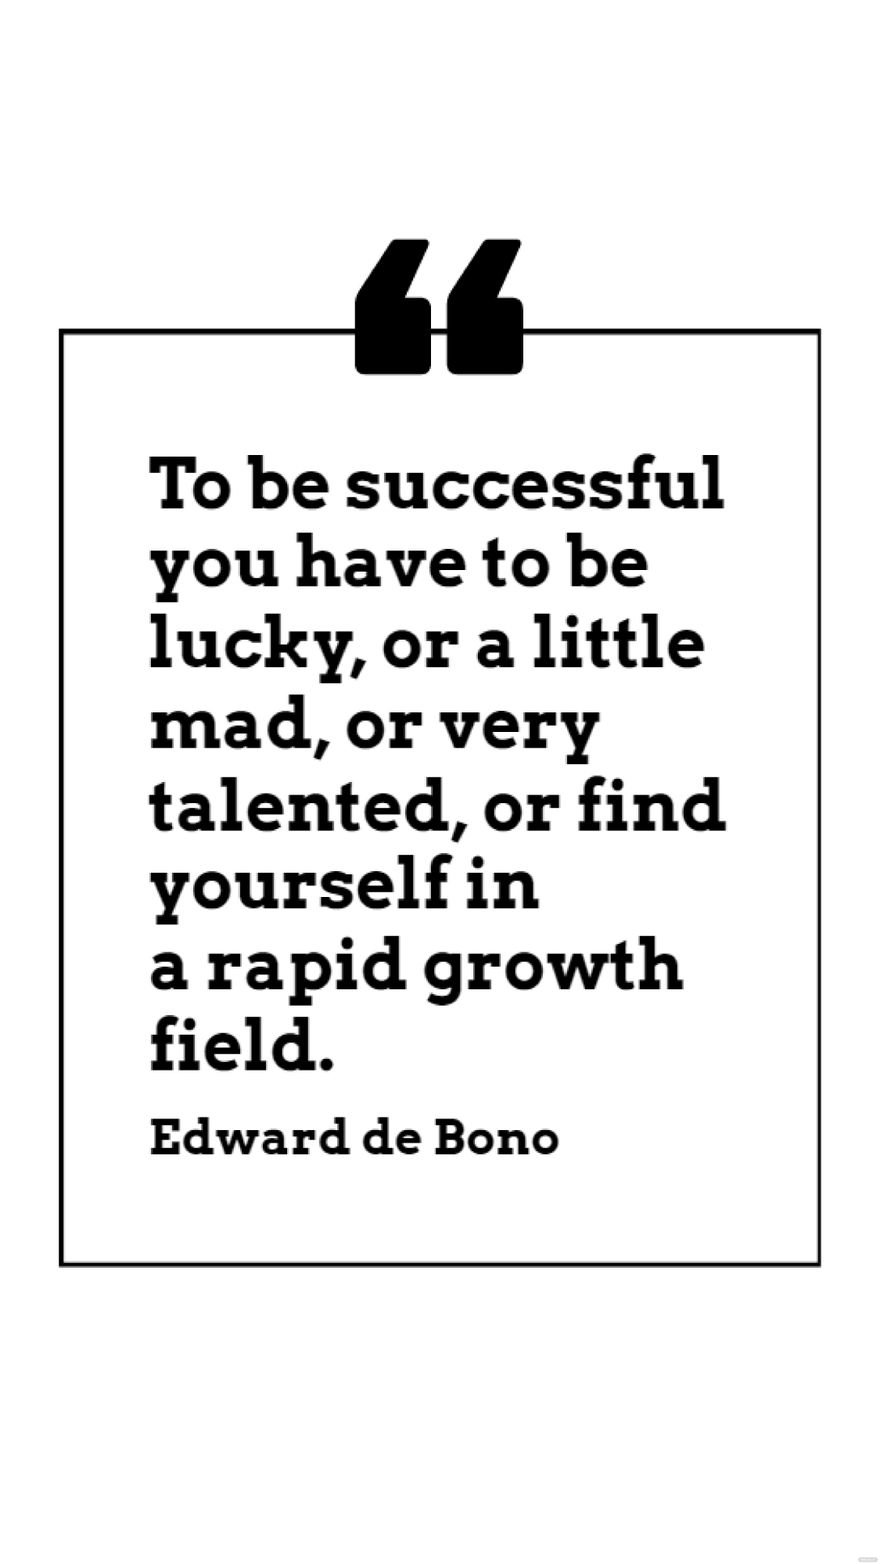 Edward de Bono - To be successful you have to be lucky, or a little mad, or very talented, or find yourself in a rapid growth field.